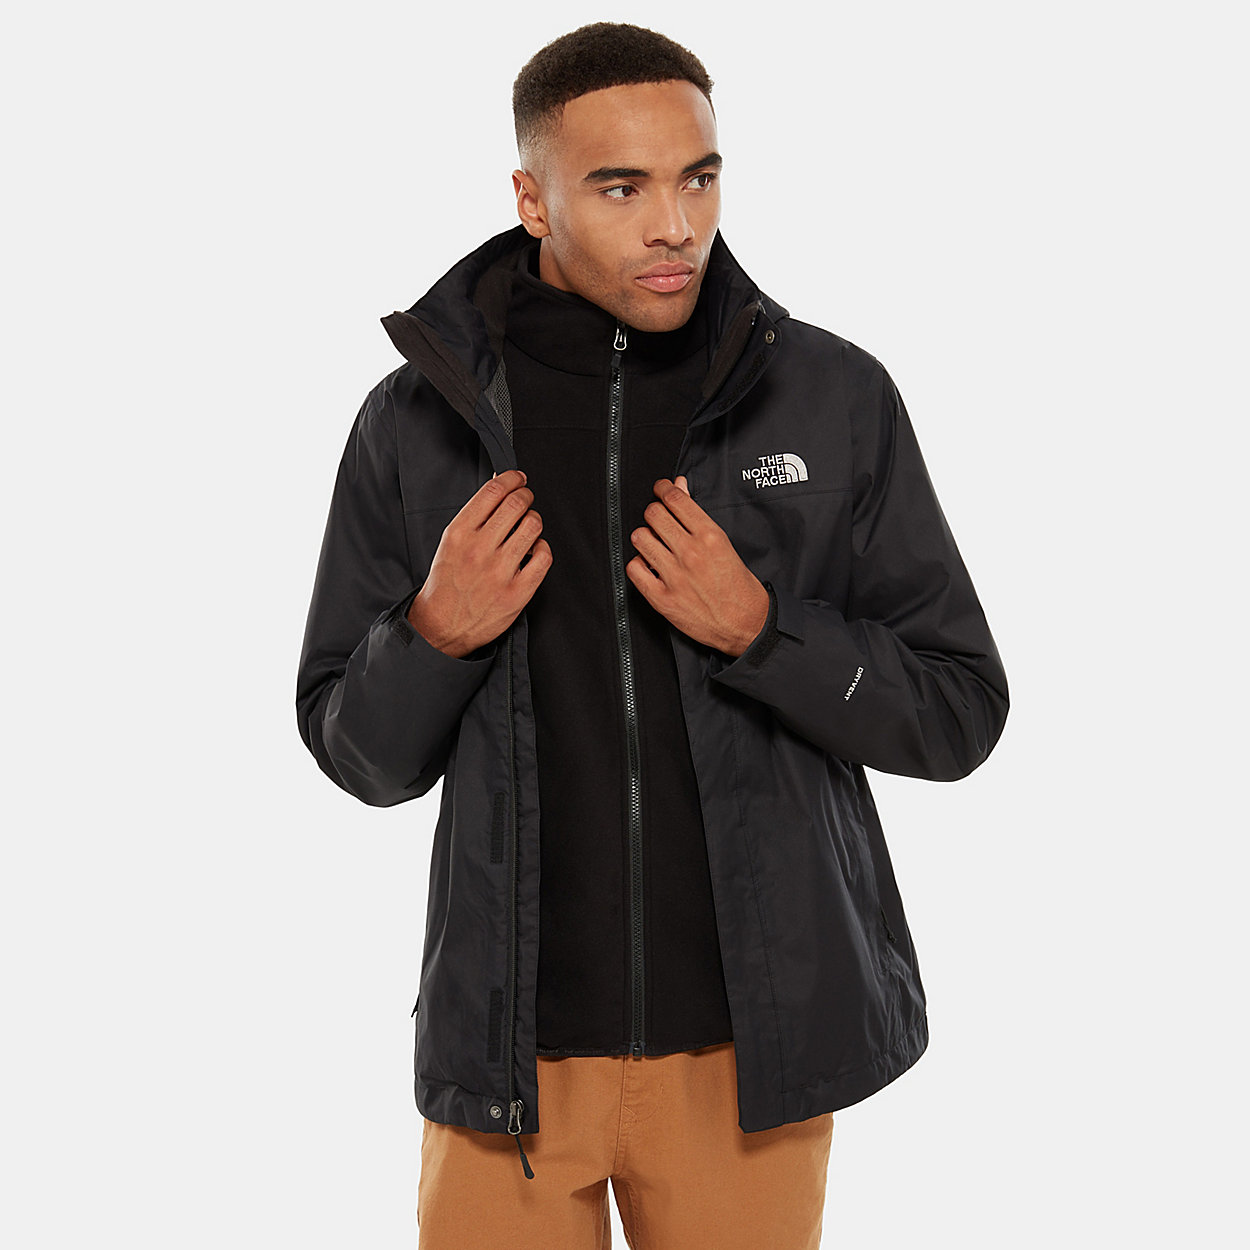 THE NORTH FACE Evolve II Triclimate